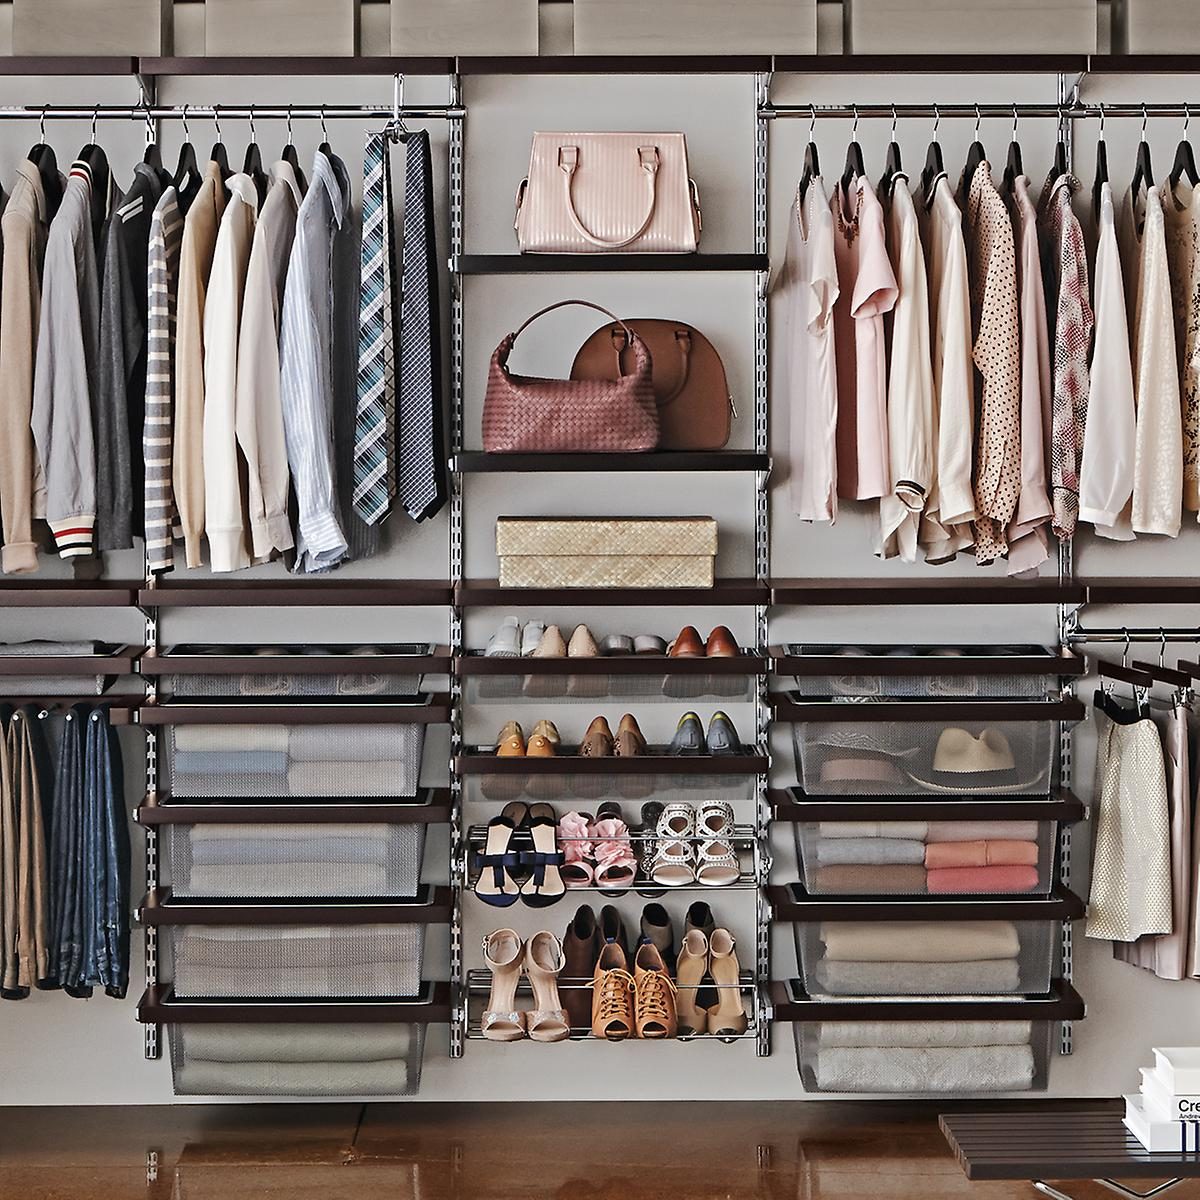 https://www.rd.com/wp-content/uploads/2021/04/Elfa-Decor-10ft-Walnut-and-Platinum-His-and-Hers-Closet-Wall-via-containerstore.com_.jpg?fit=696%2C696